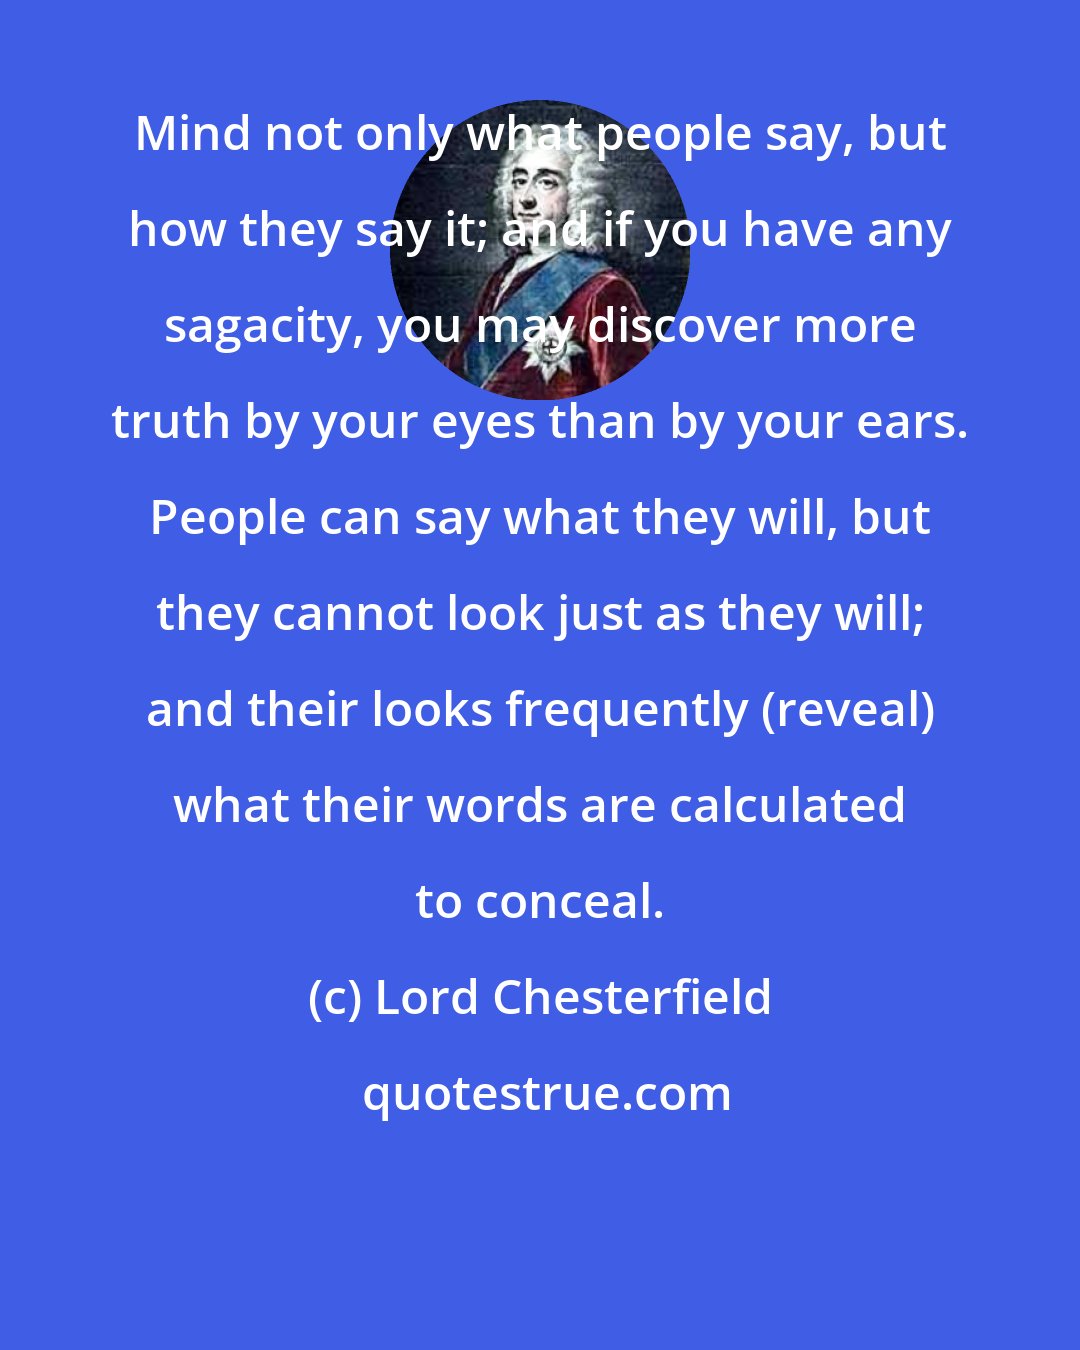 Lord Chesterfield: Mind not only what people say, but how they say it; and if you have any sagacity, you may discover more truth by your eyes than by your ears. People can say what they will, but they cannot look just as they will; and their looks frequently (reveal) what their words are calculated to conceal.